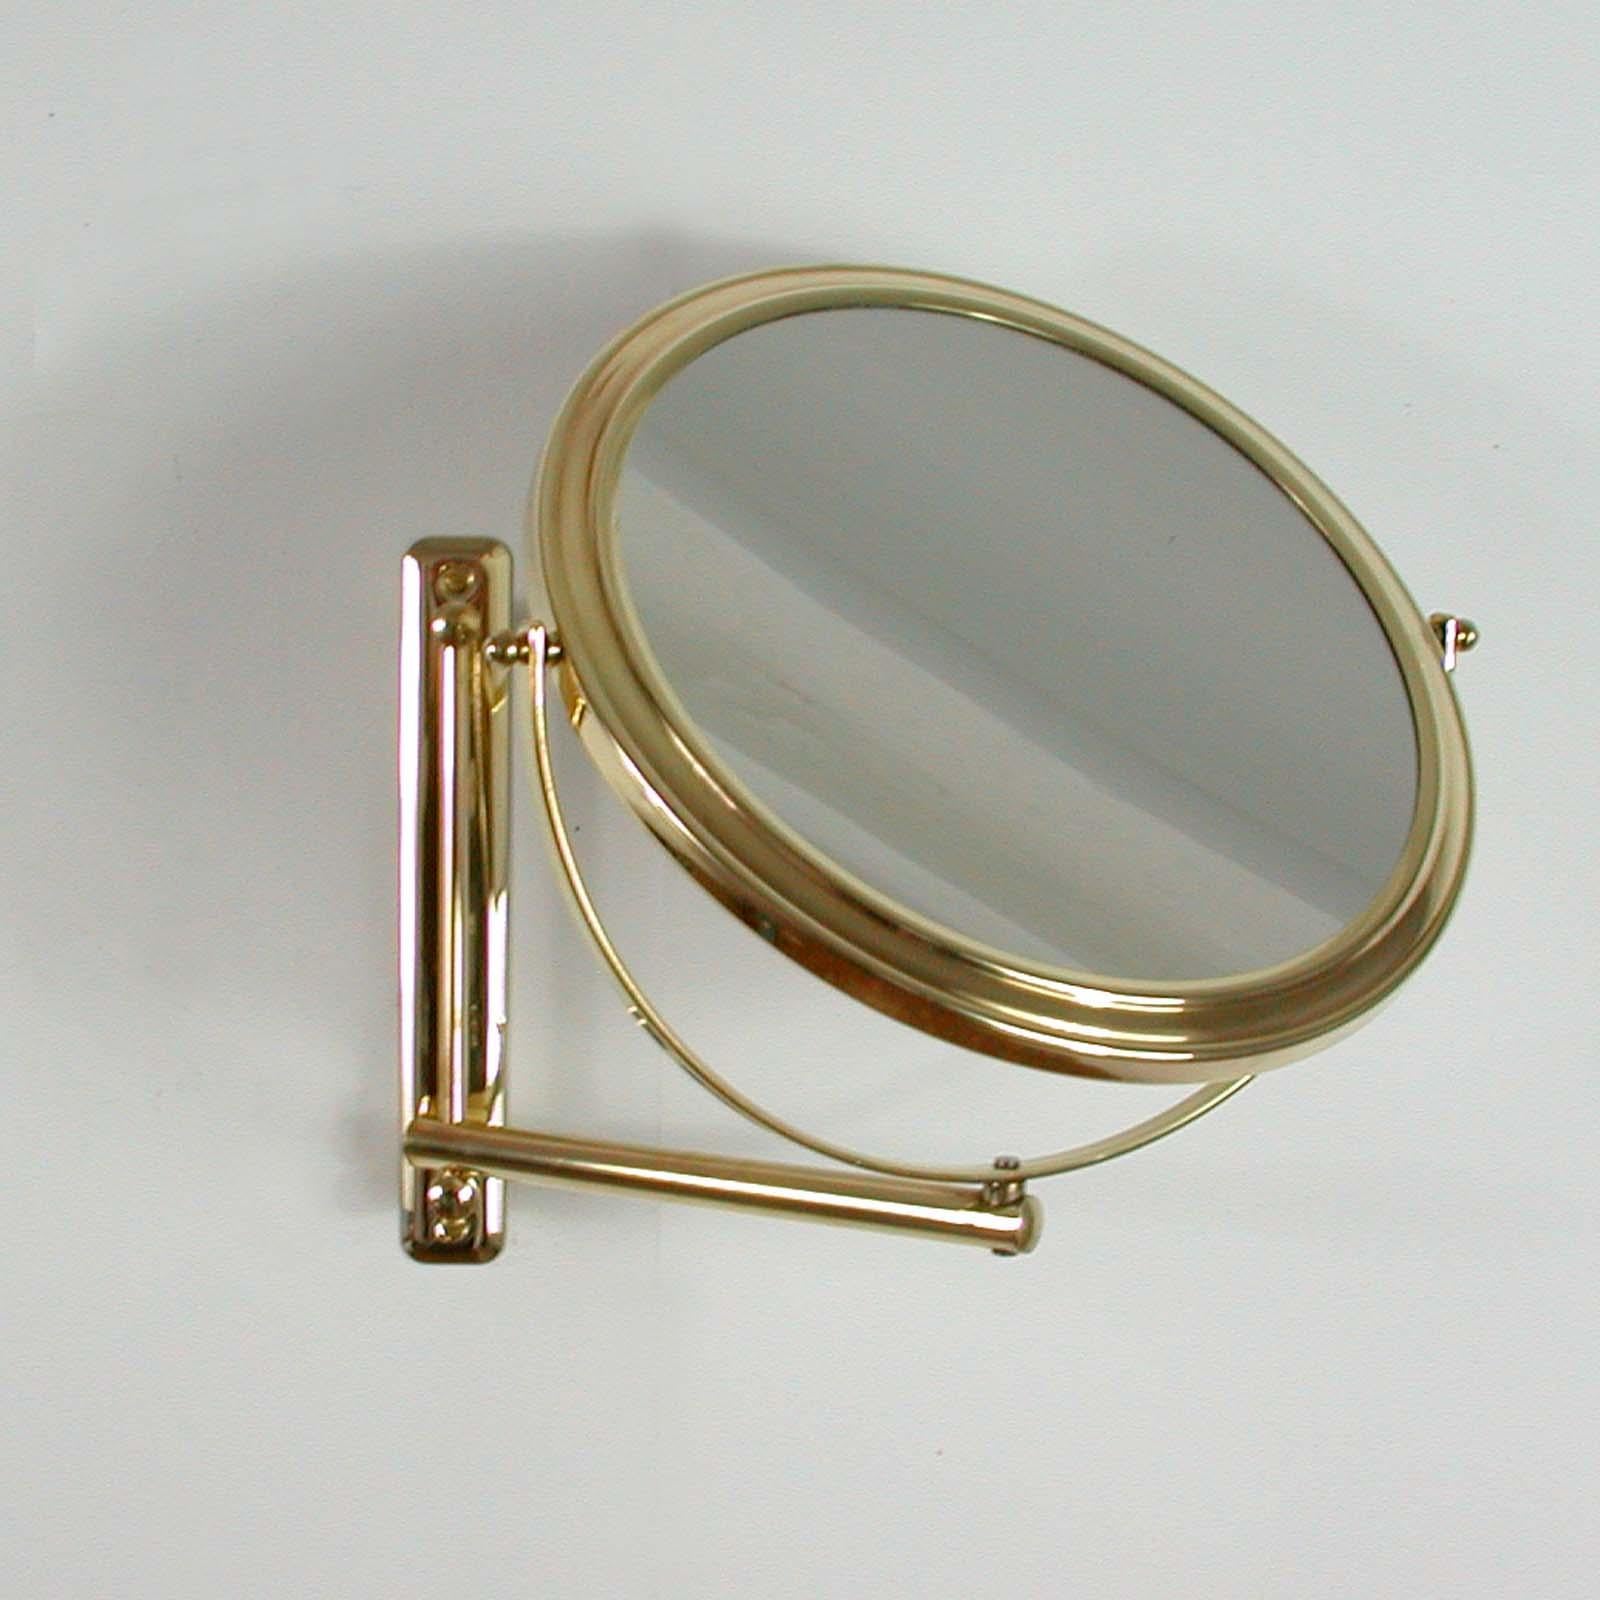 Italian Articulating and Adjustable Brass Vanity 2-Sided Wall Mirror, 1950s For Sale 3